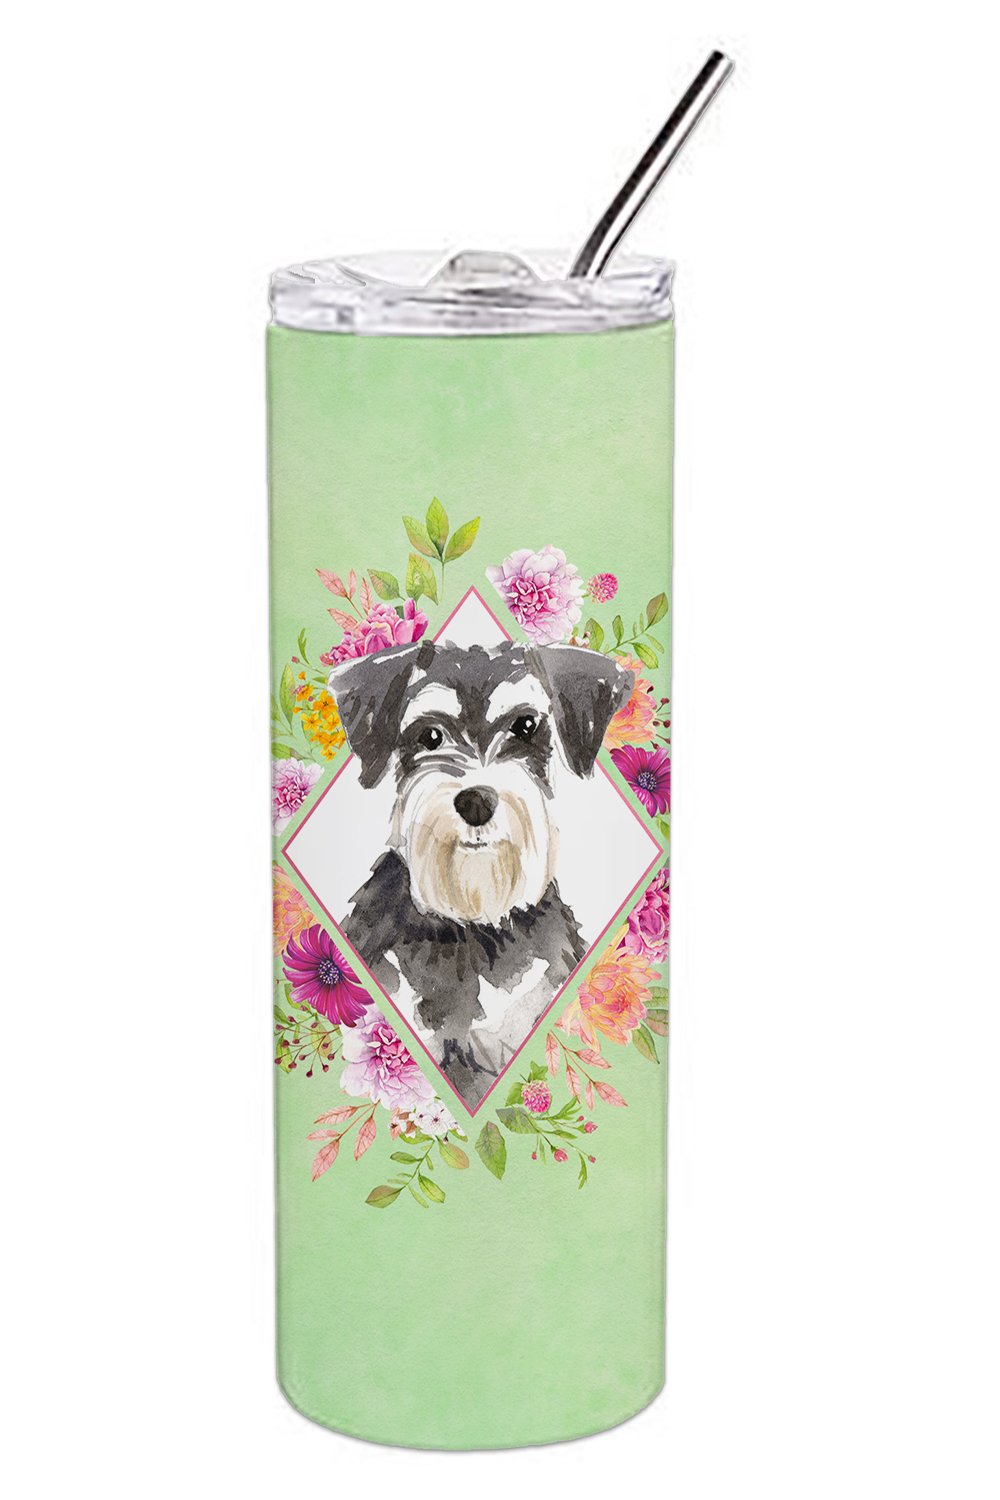 Schnauzer #2 Green Flowers Double Walled Stainless Steel 20 oz Skinny Tumbler CK4382TBL20 by Caroline's Treasures